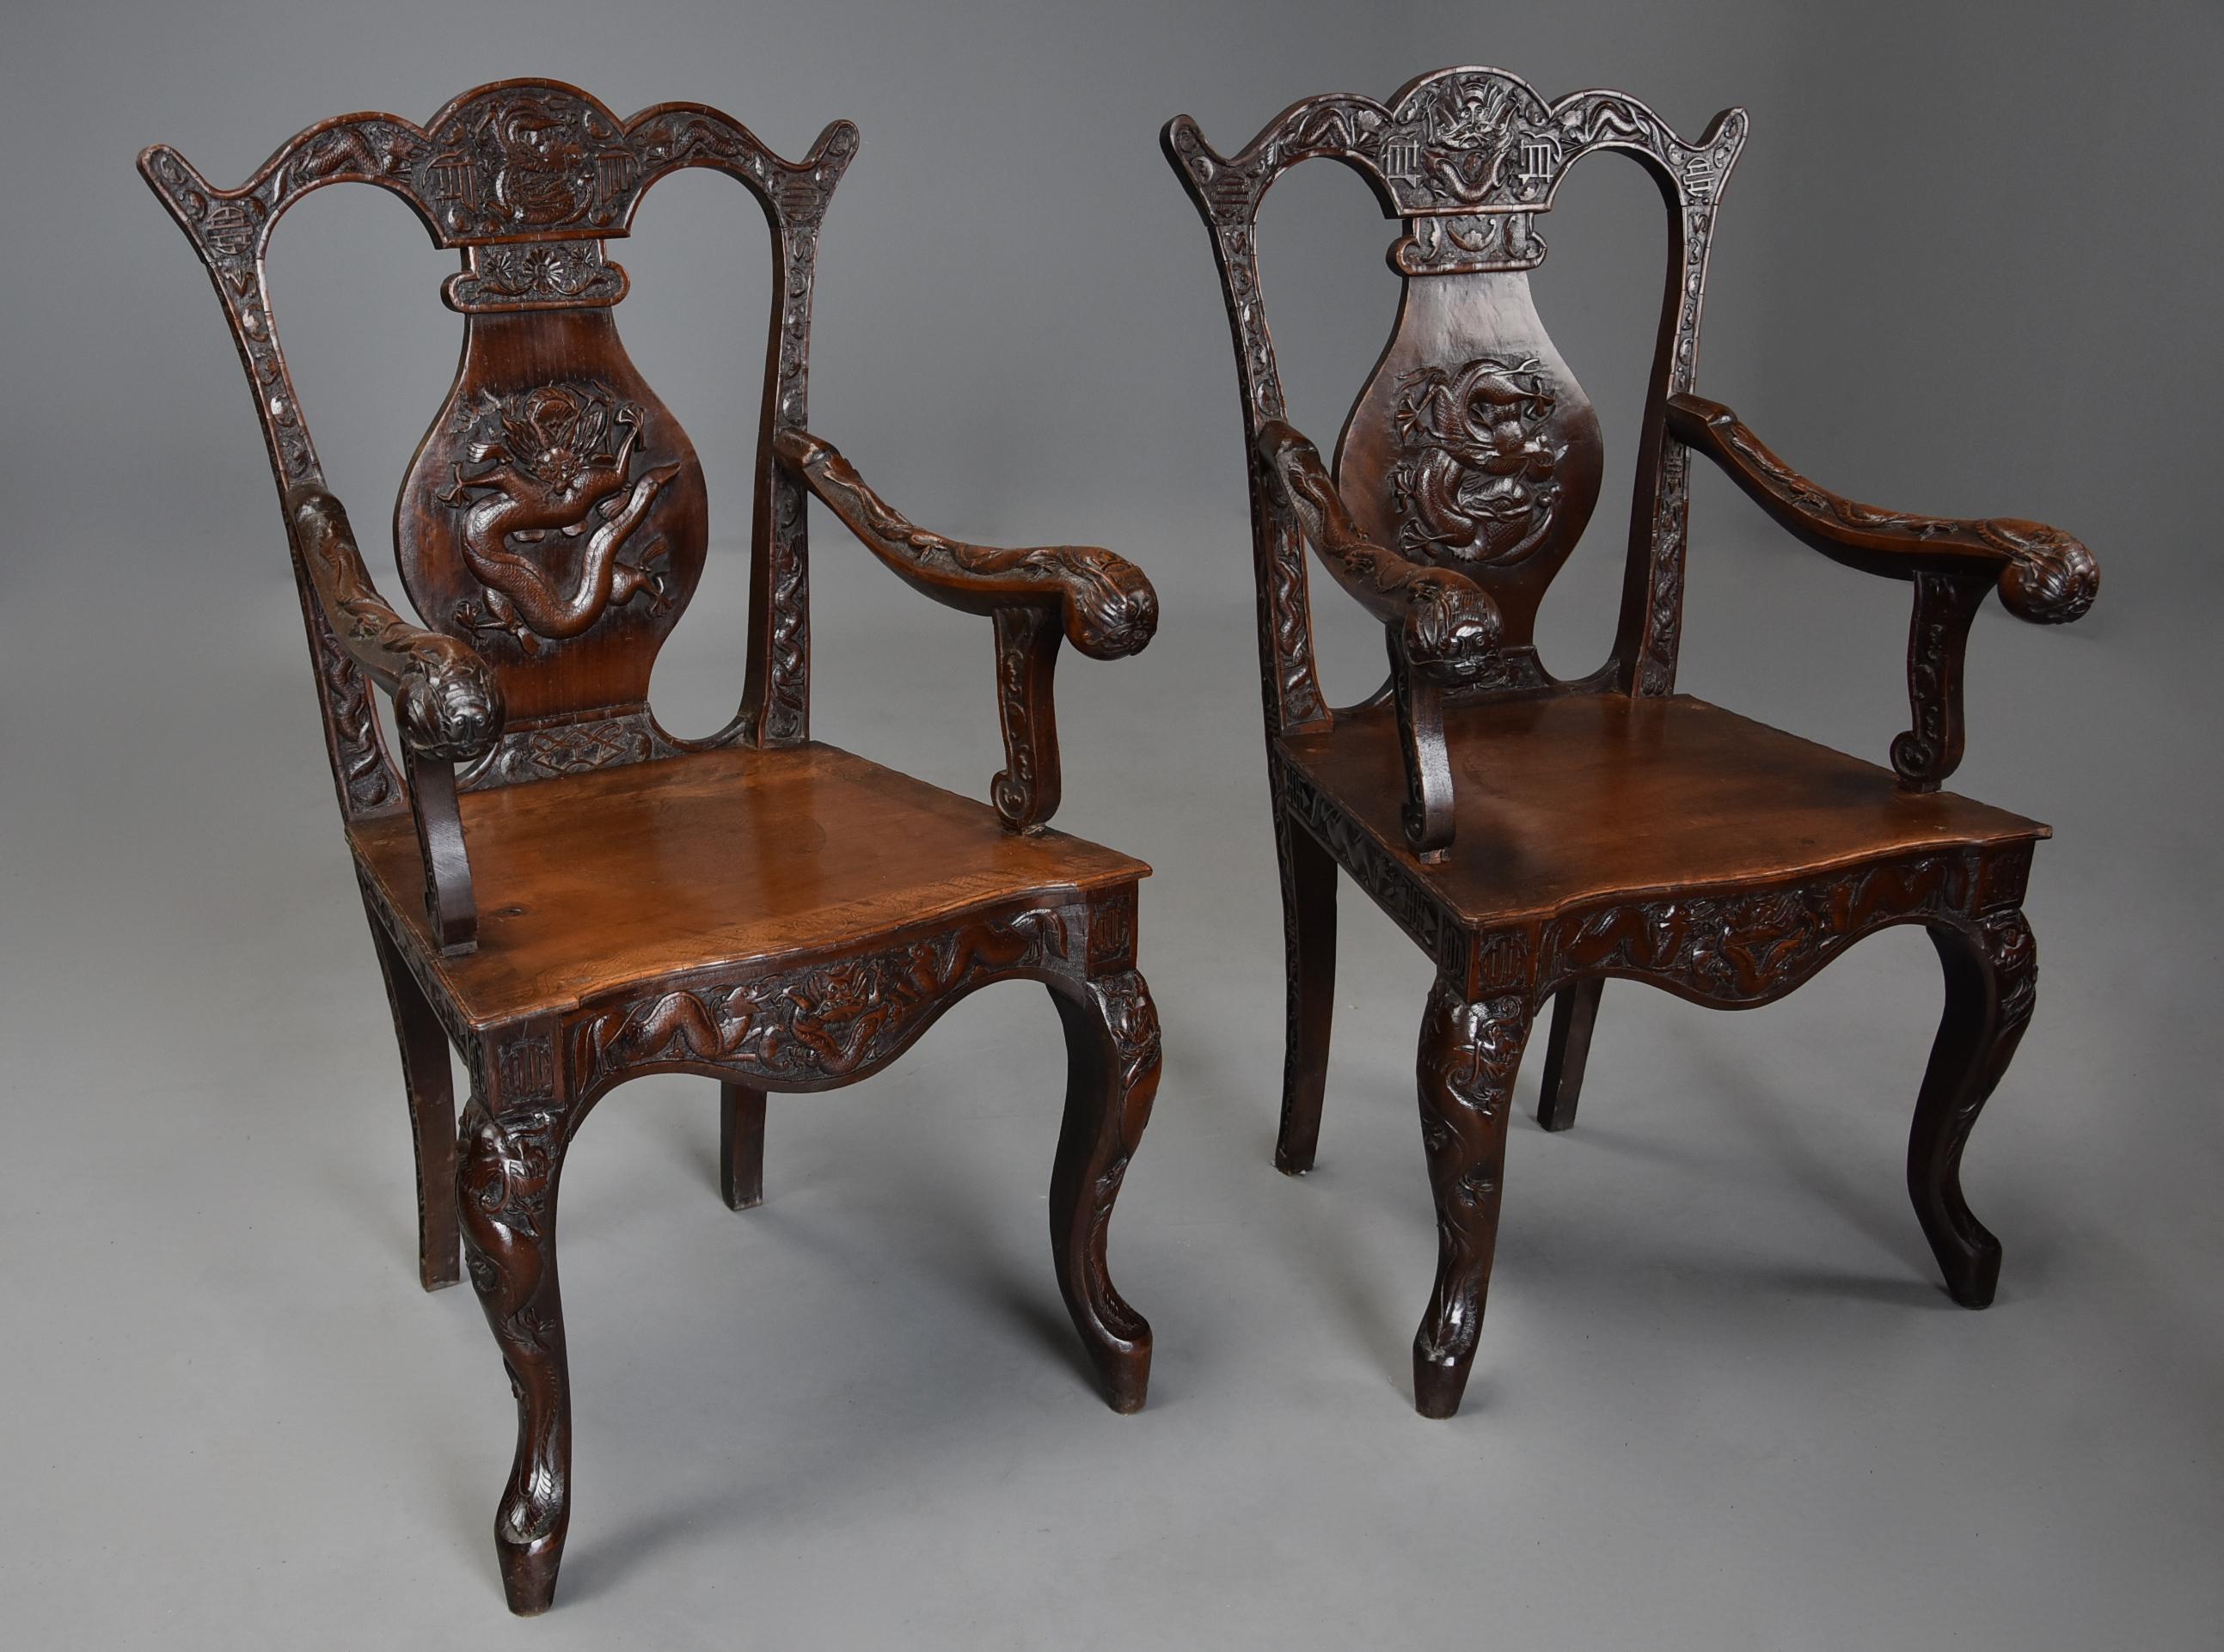 Pair of 19th Century Walnut Armchairs of Chinese Influence, 18th Century Style In Good Condition For Sale In Suffolk, GB